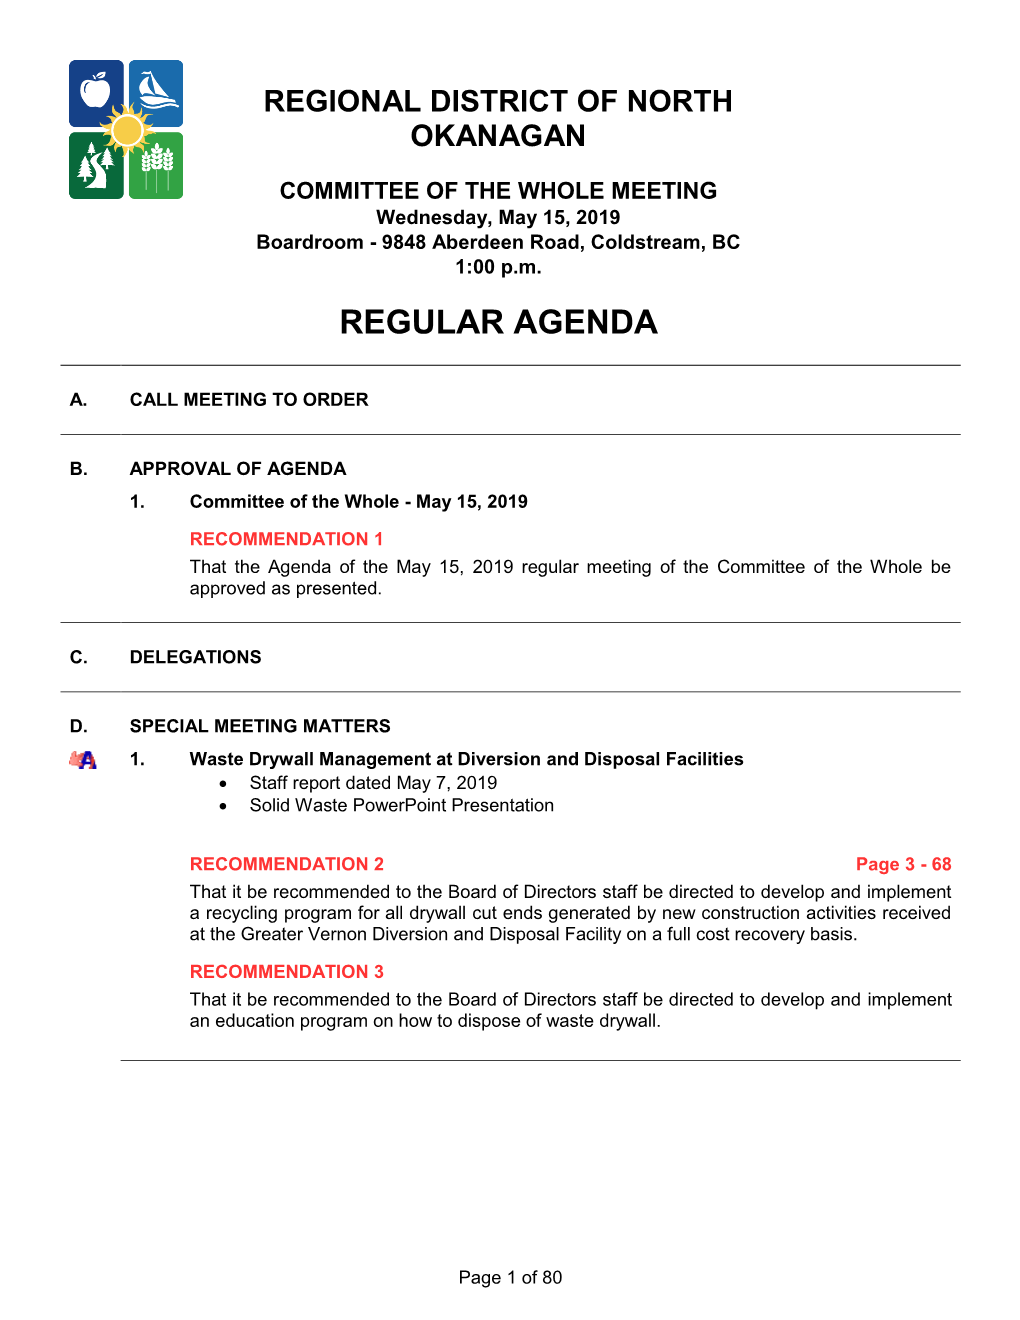 COMMITTEE of the WHOLE MEETING Wednesday, May 15, 2019 Boardroom - 9848 Aberdeen Road, Coldstream, BC 1:00 P.M